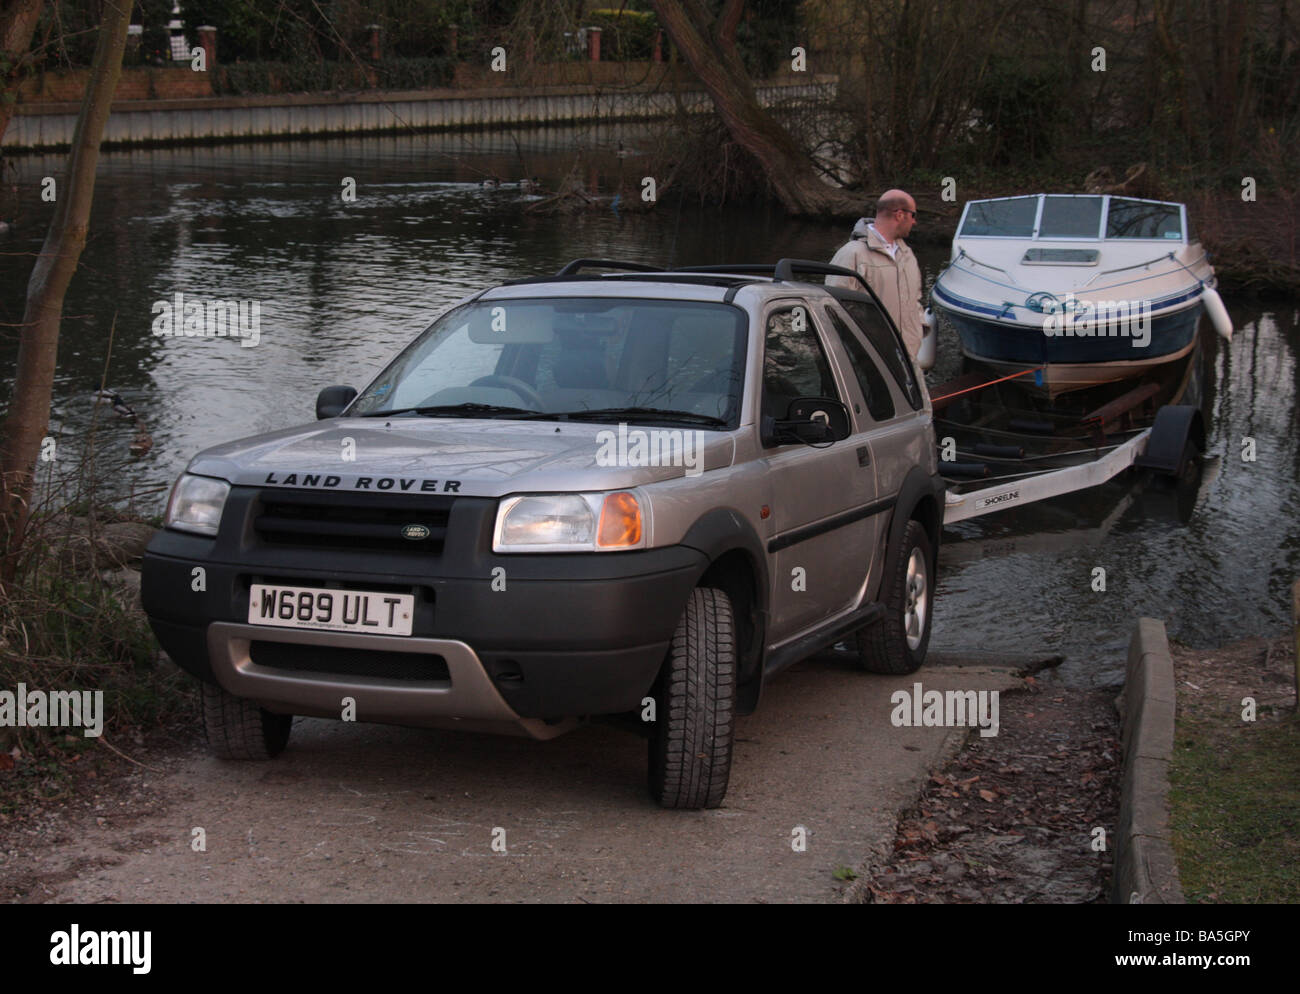 A Landrover Freelander pulling a boat Stock Photo